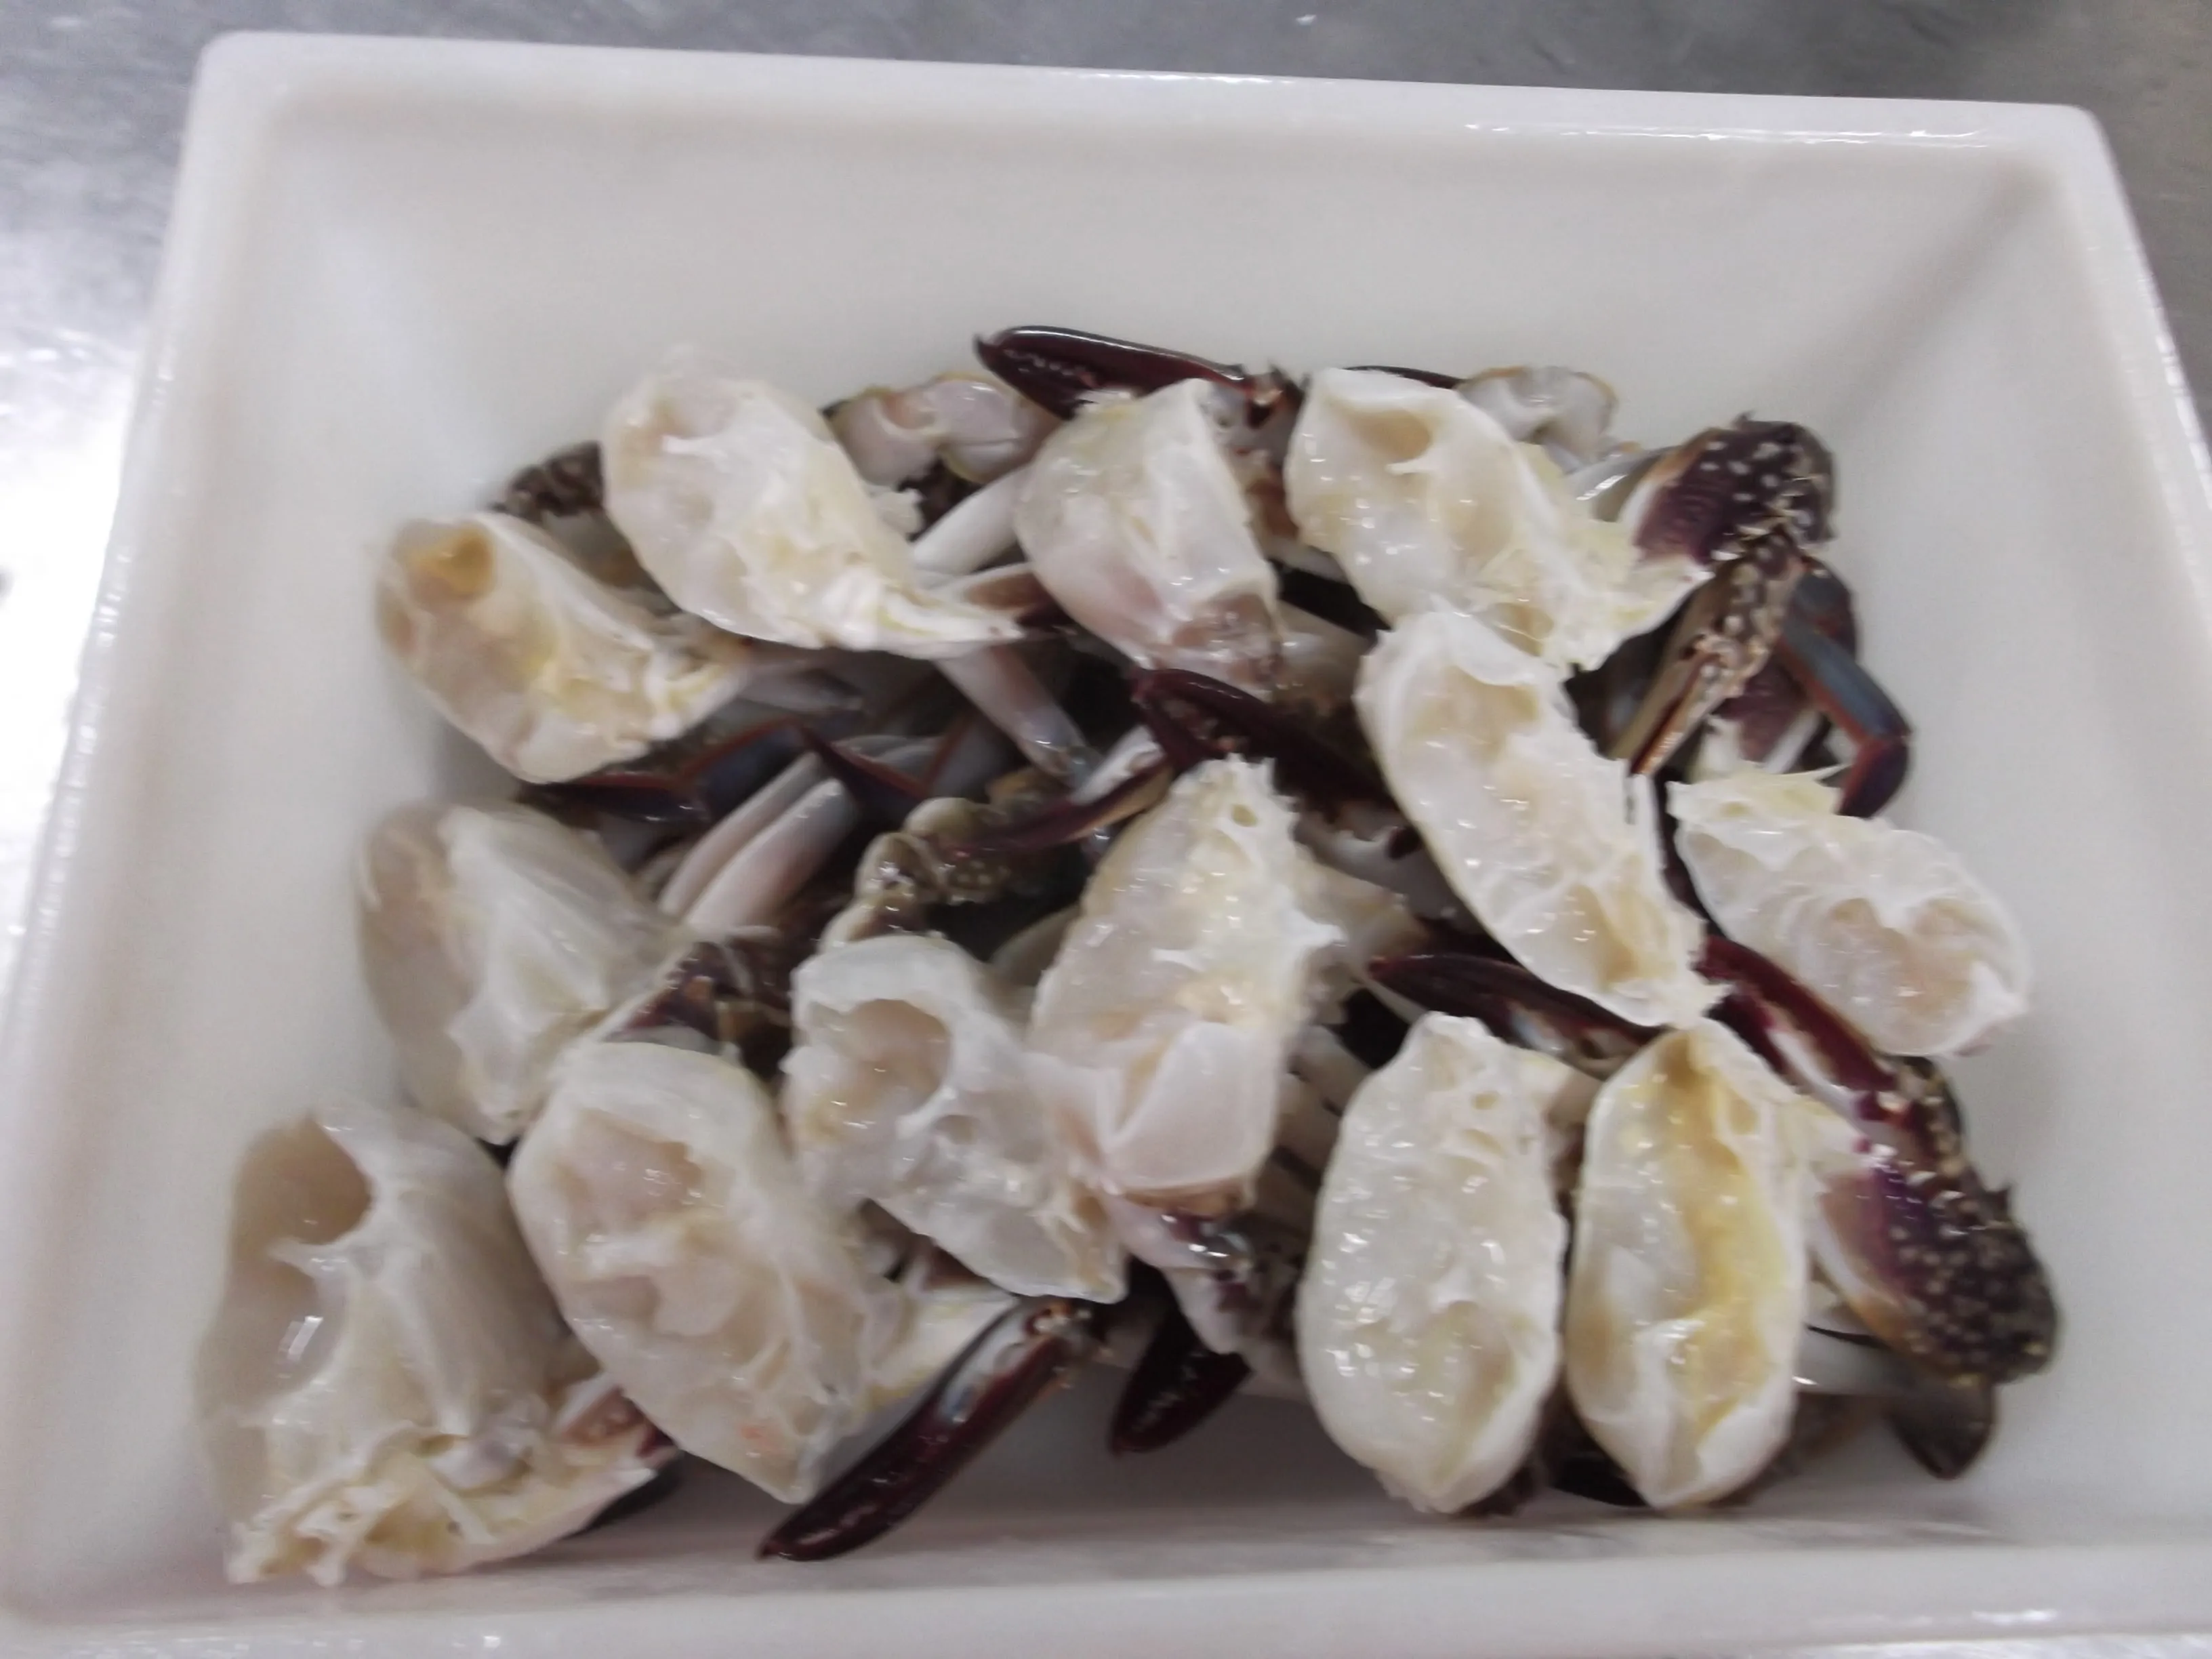 Wholesale New Stock Hot Sale Frozen Crab Seafood Frozen Cut Swimming Crab